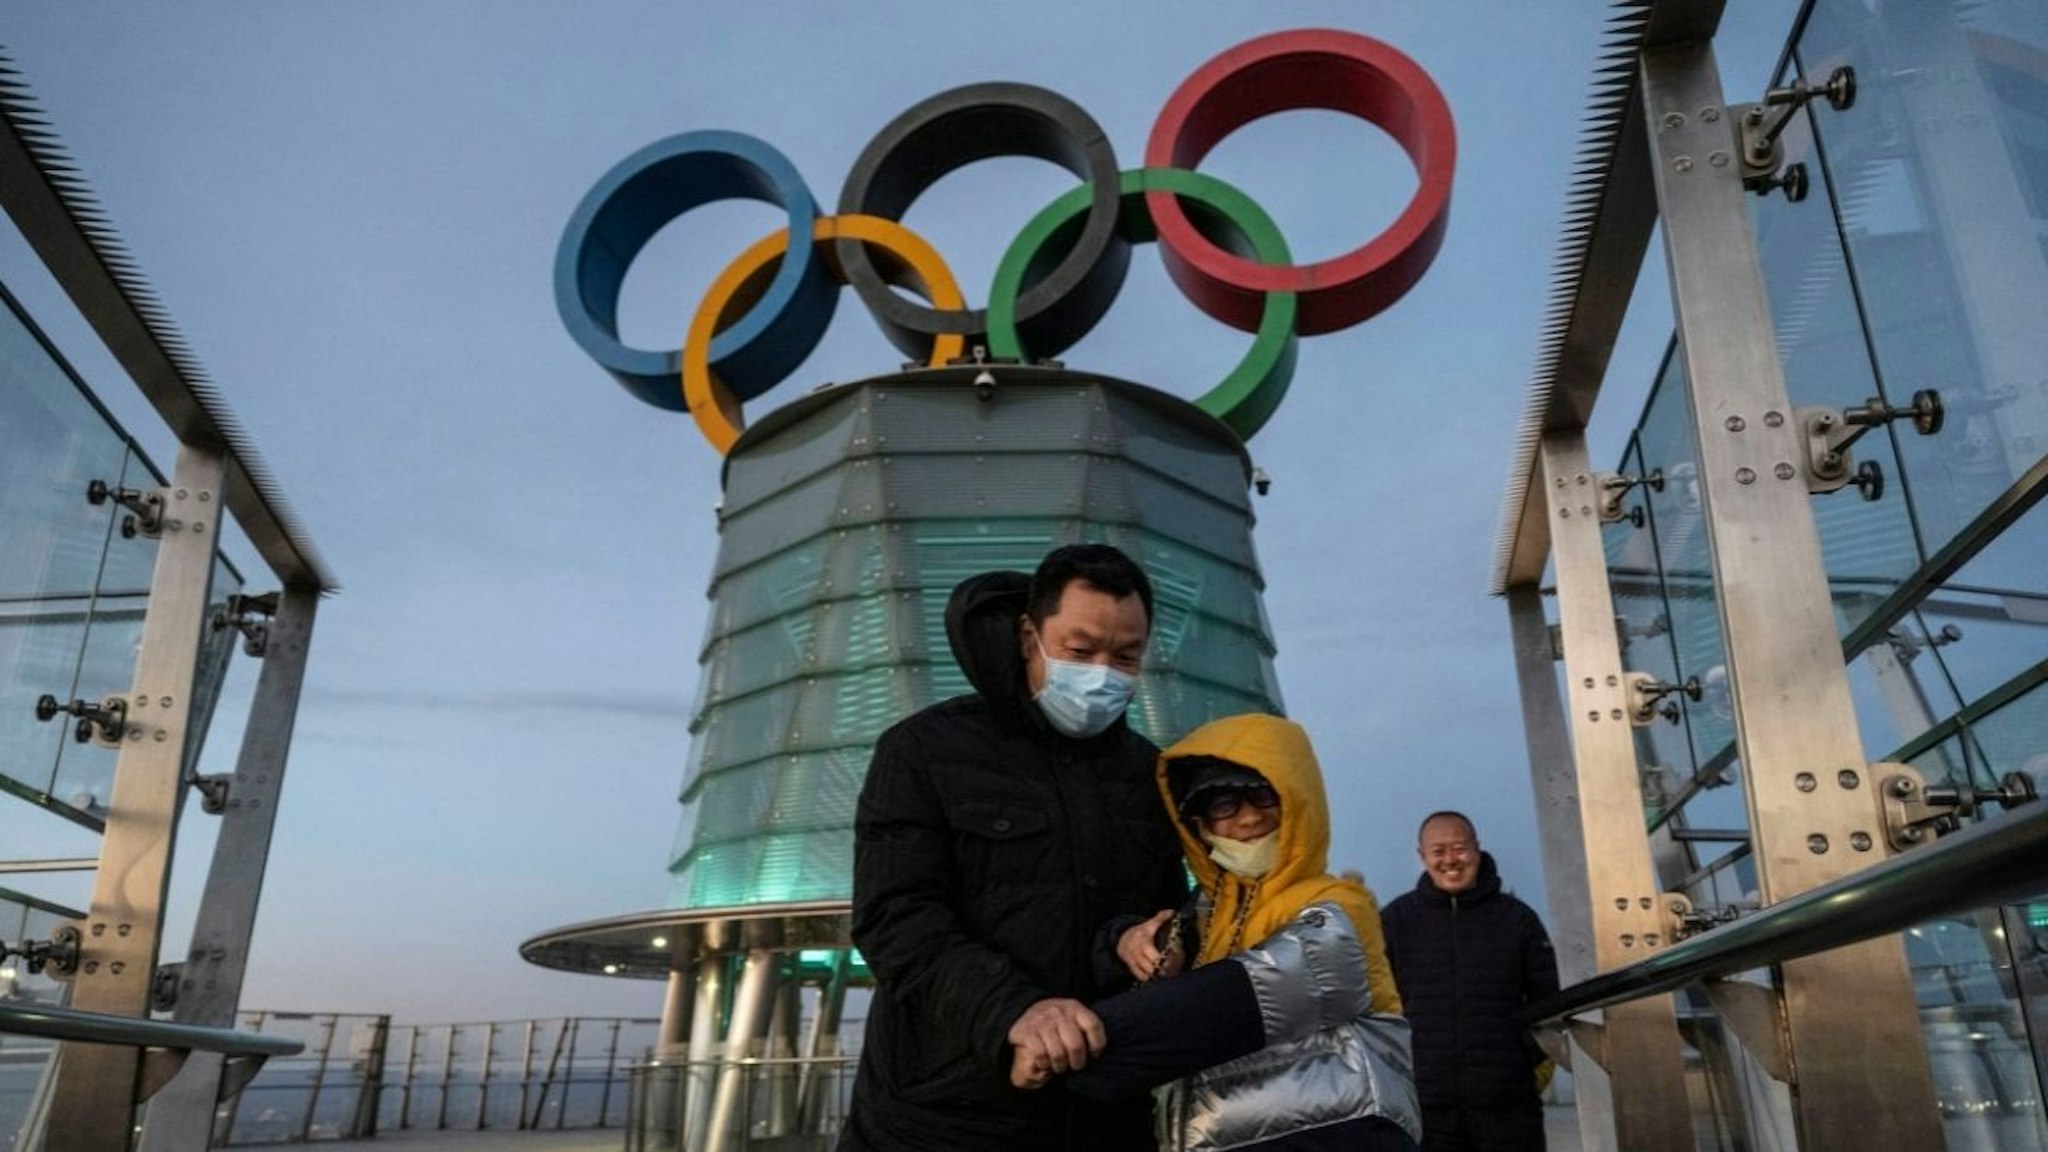 Visitors walk near a column with the Olympic Rings as they visit the top level of the Olympic Tower in the Olympic Green near the National Stadium, also known as the Bird's Nest, on December 11, 2021 in Beijing, China.